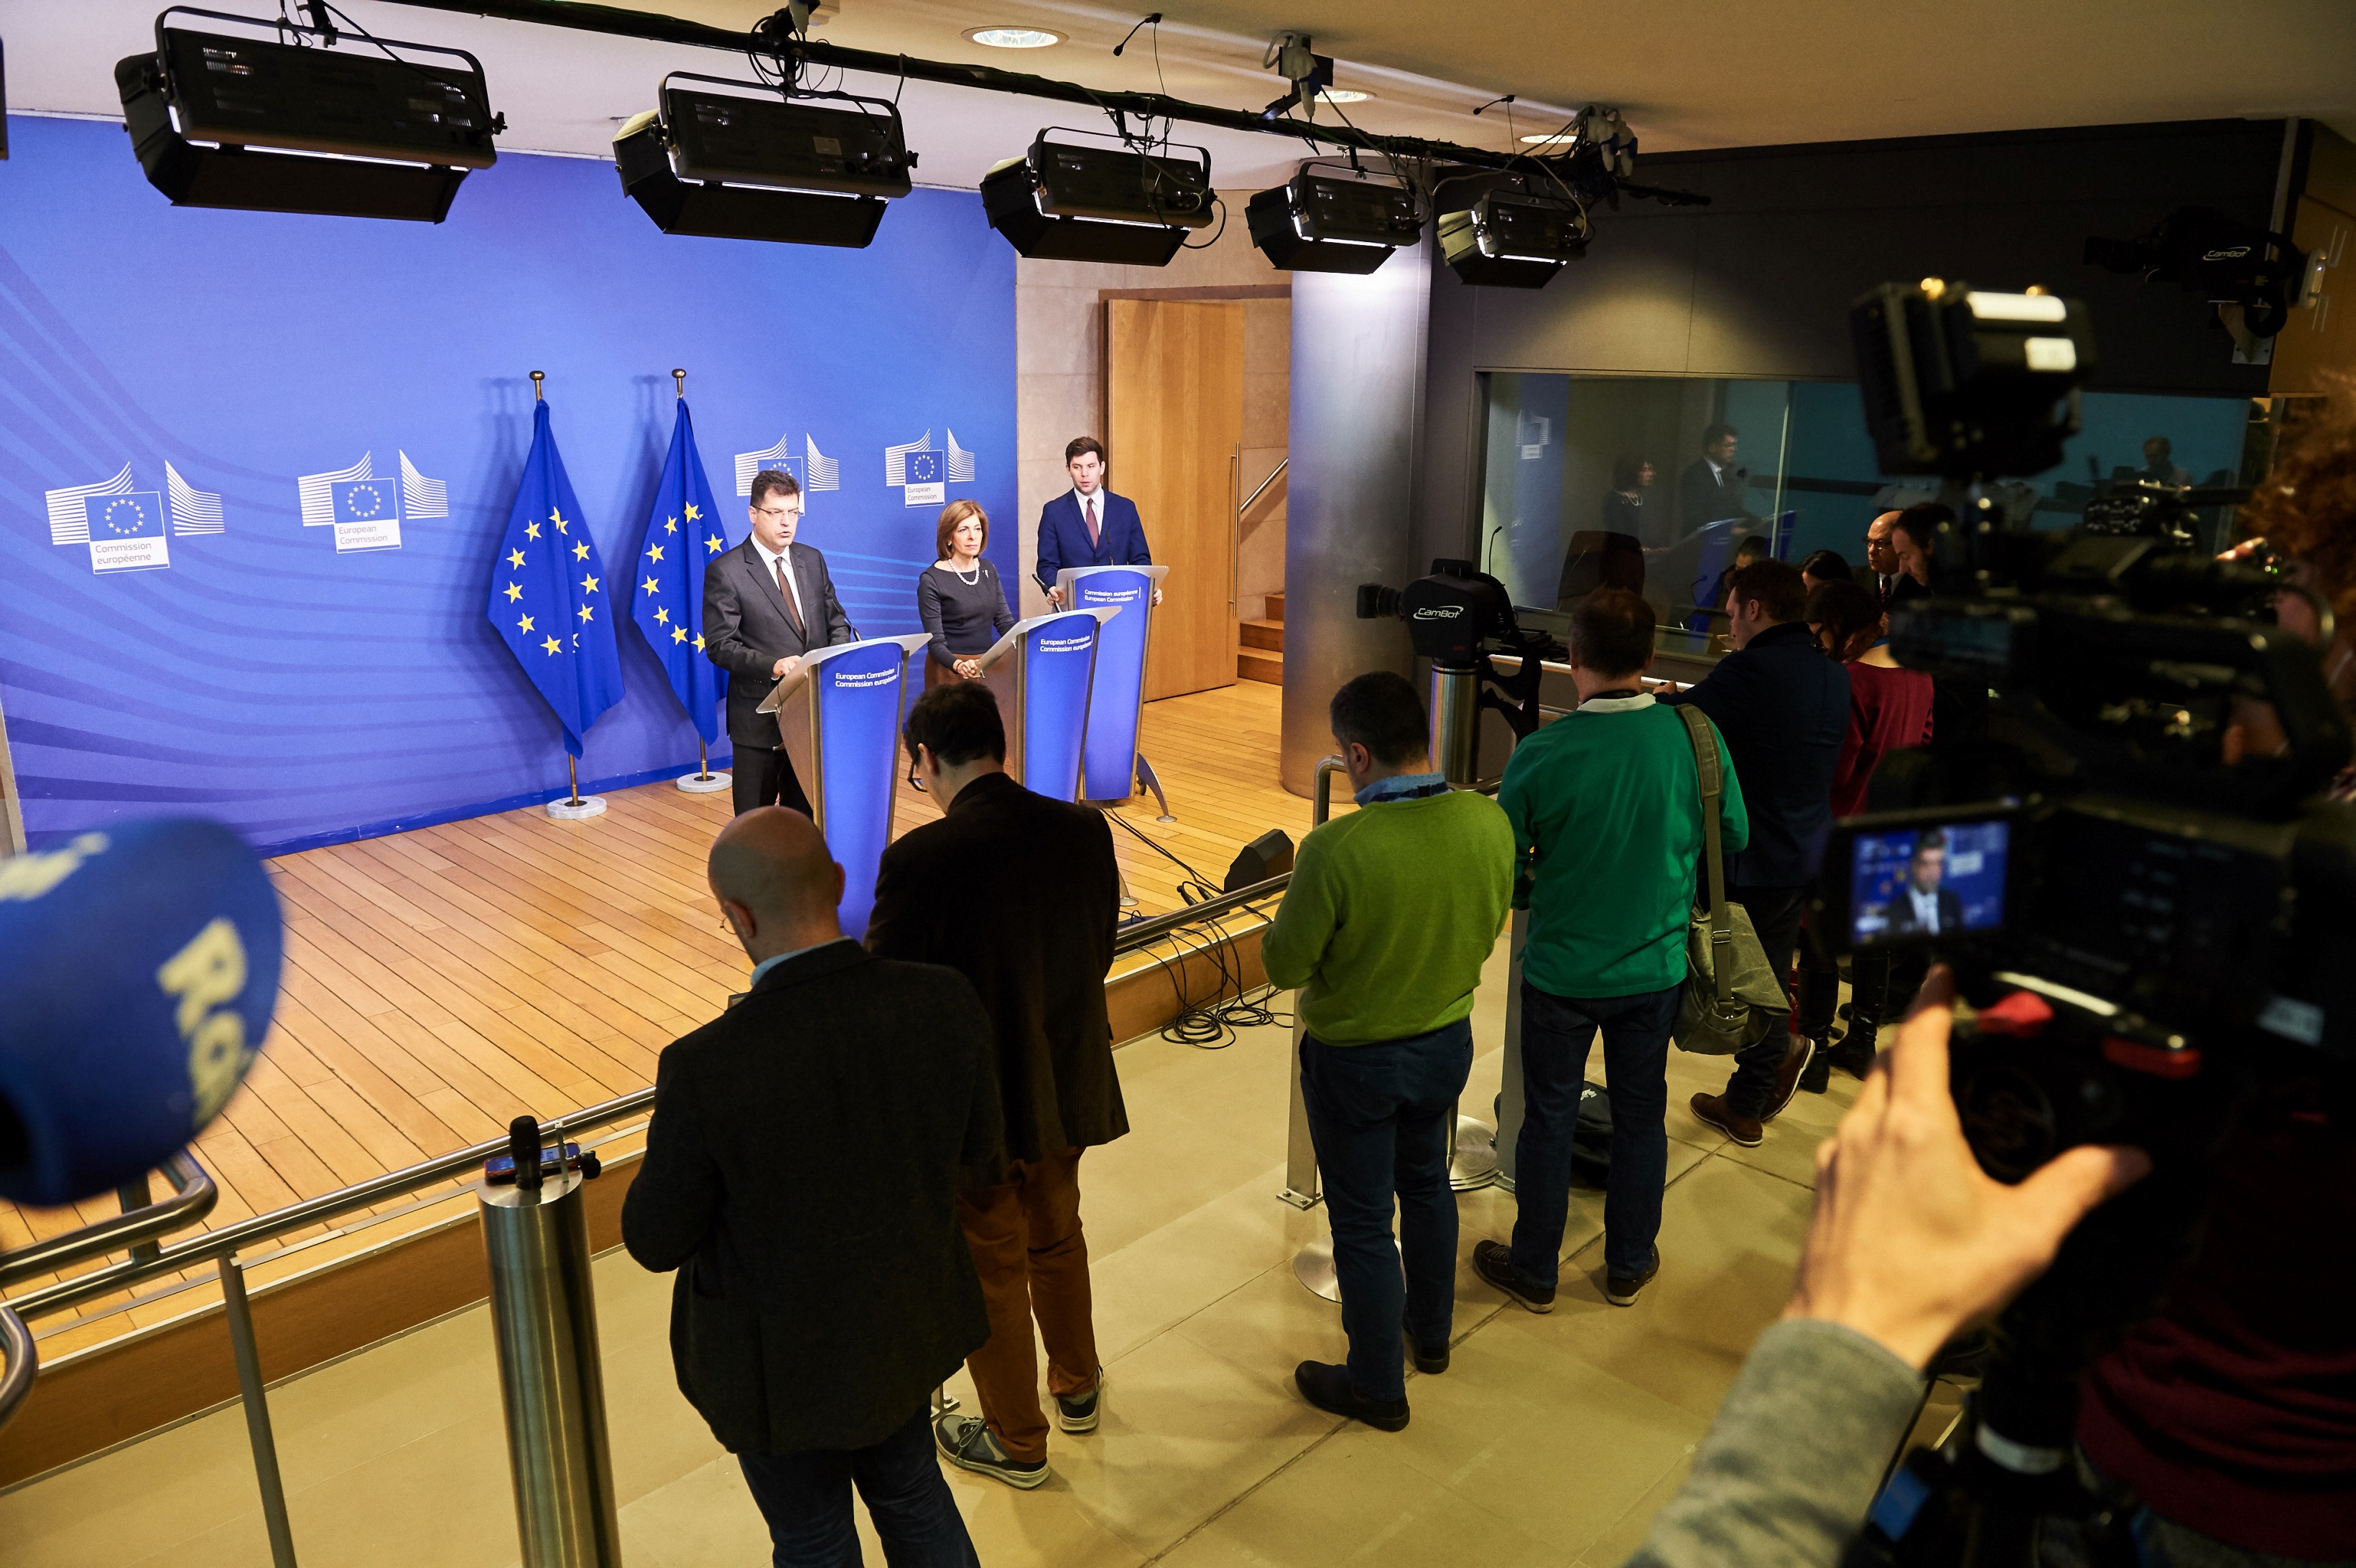 Stella Kyriakides EU Commissioner for Health, and Janez Lenarcic, EU Commissioner for Crisis Management speaking at the press conf.